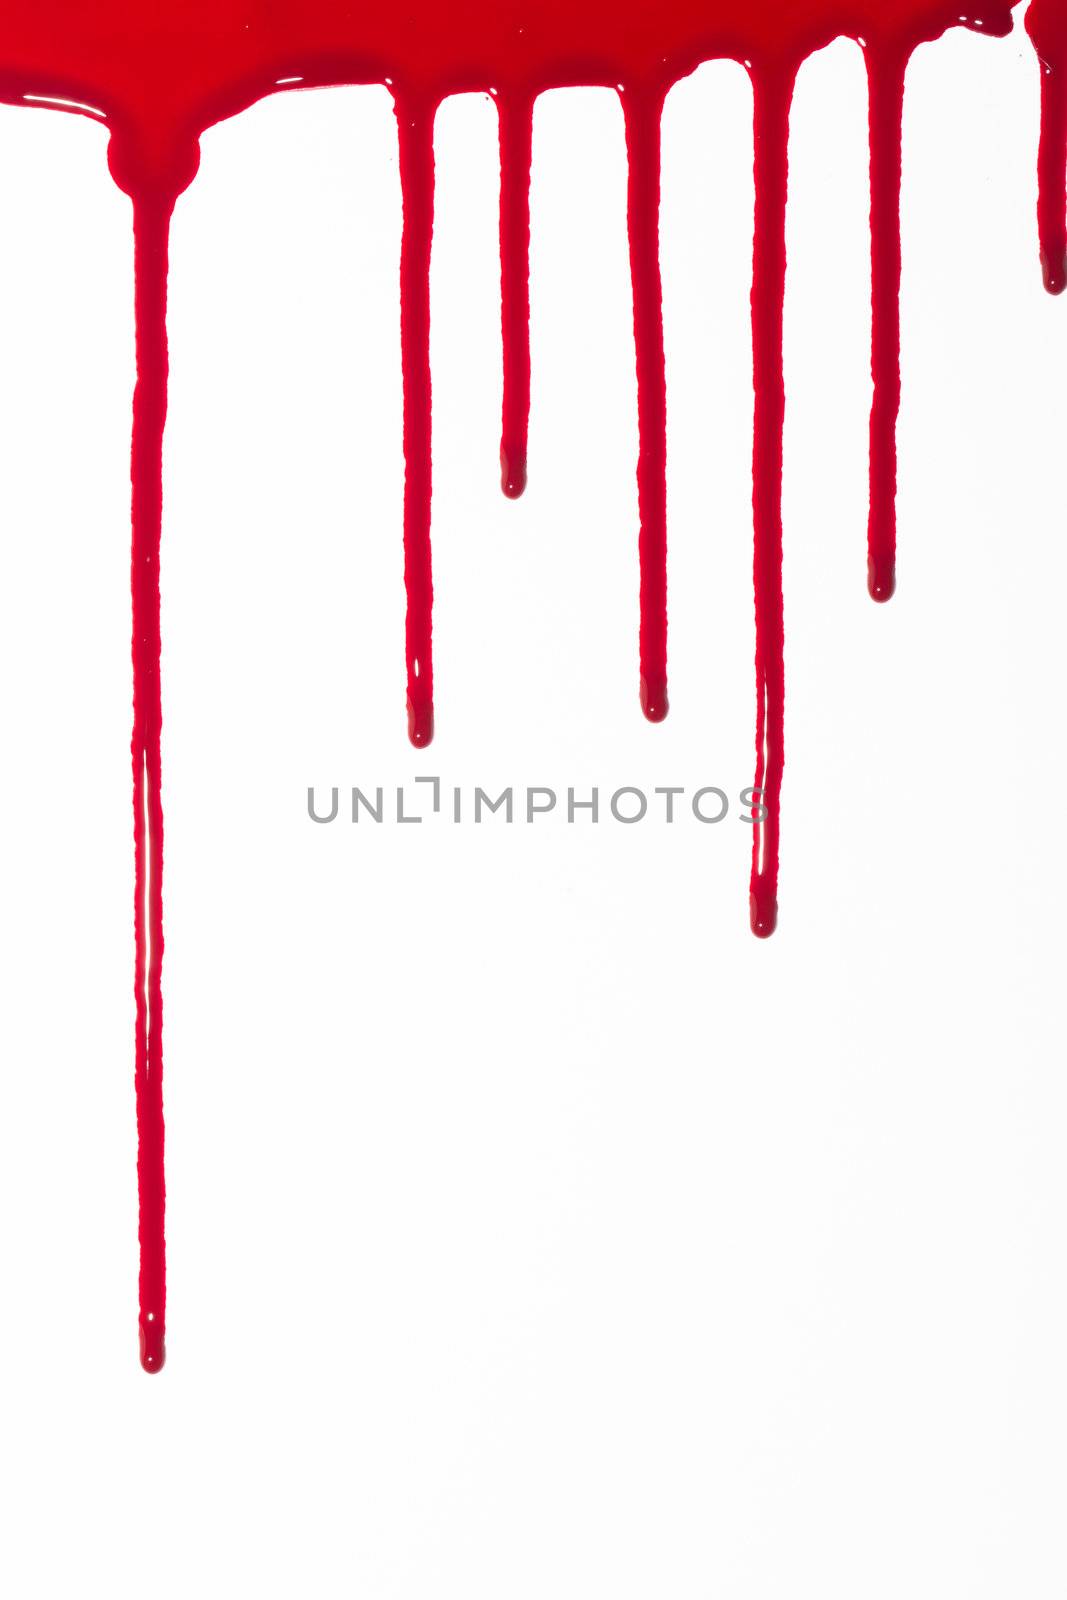 Blood and paint drips oozing by jamenpercy